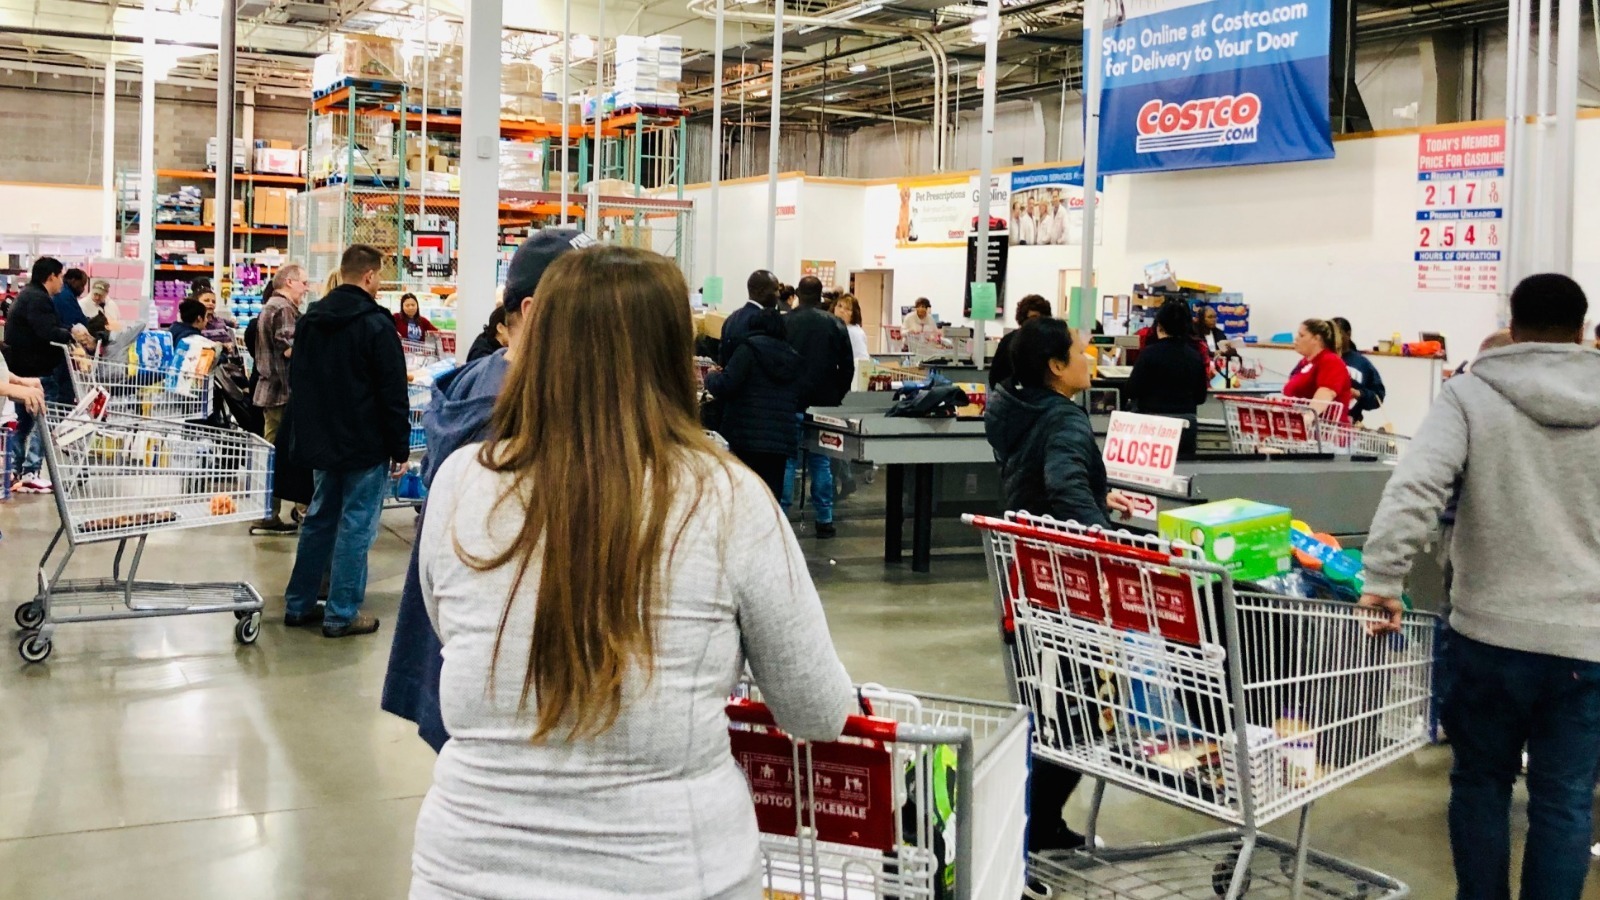 1. "Costco Reddit" - A subreddit dedicated to discussing all things Costco, including discounts and deals - wide 3